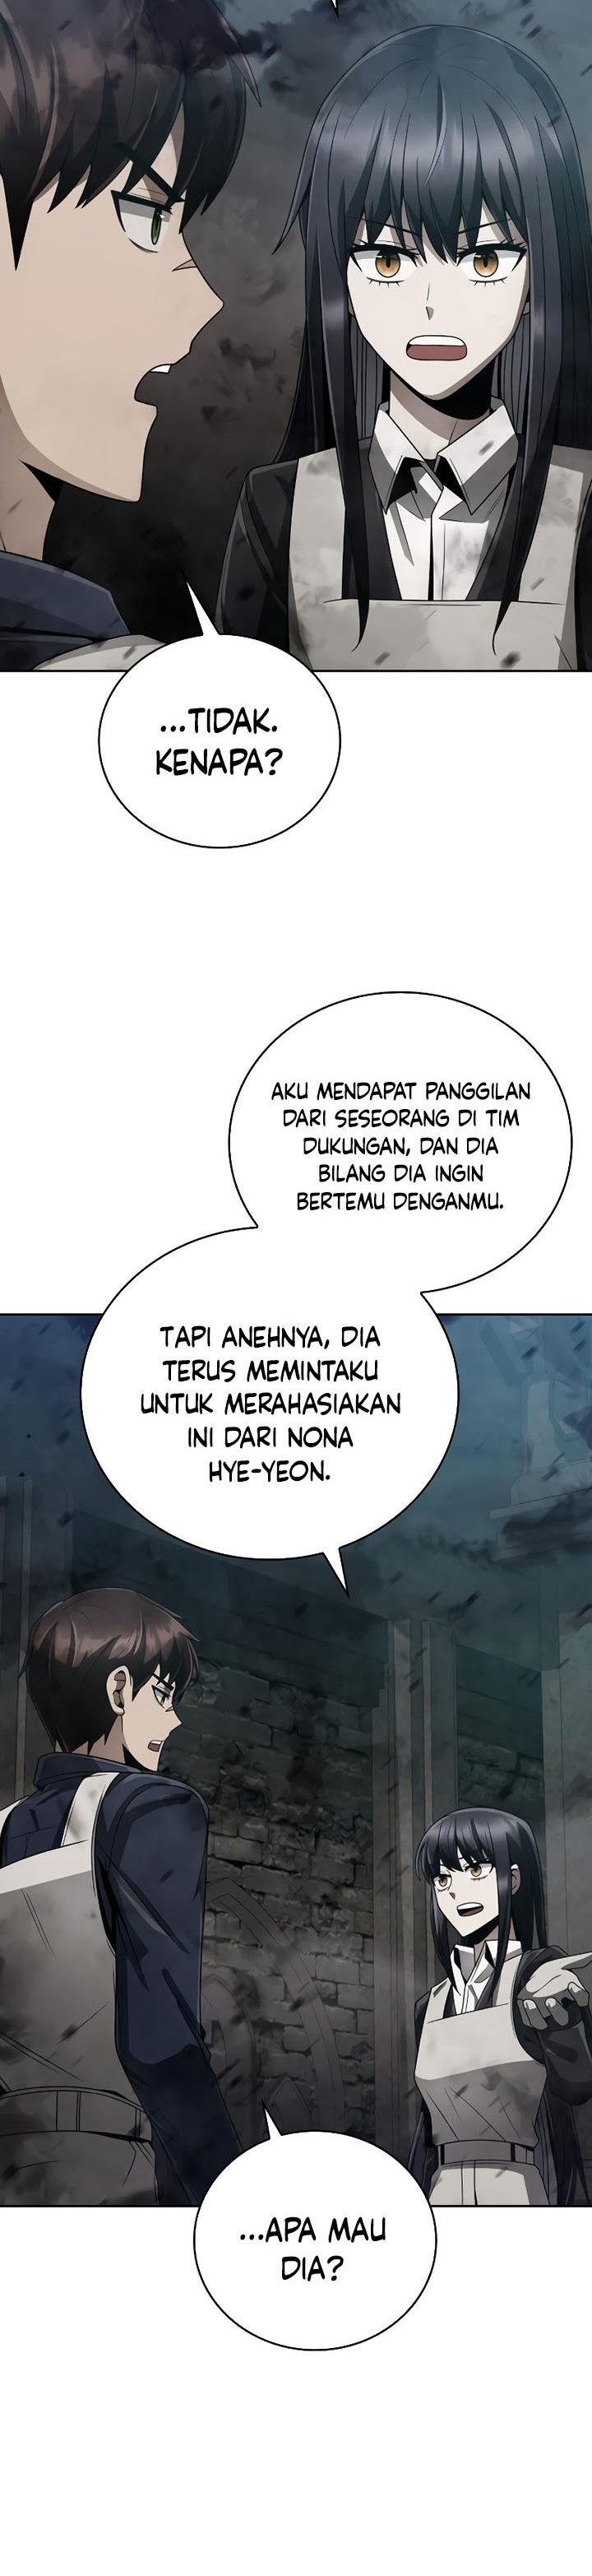 Dilarang COPAS - situs resmi www.mangacanblog.com - Komik clever cleaning life of the returned genius hunter 019 - chapter 19 20 Indonesia clever cleaning life of the returned genius hunter 019 - chapter 19 Terbaru 18|Baca Manga Komik Indonesia|Mangacan